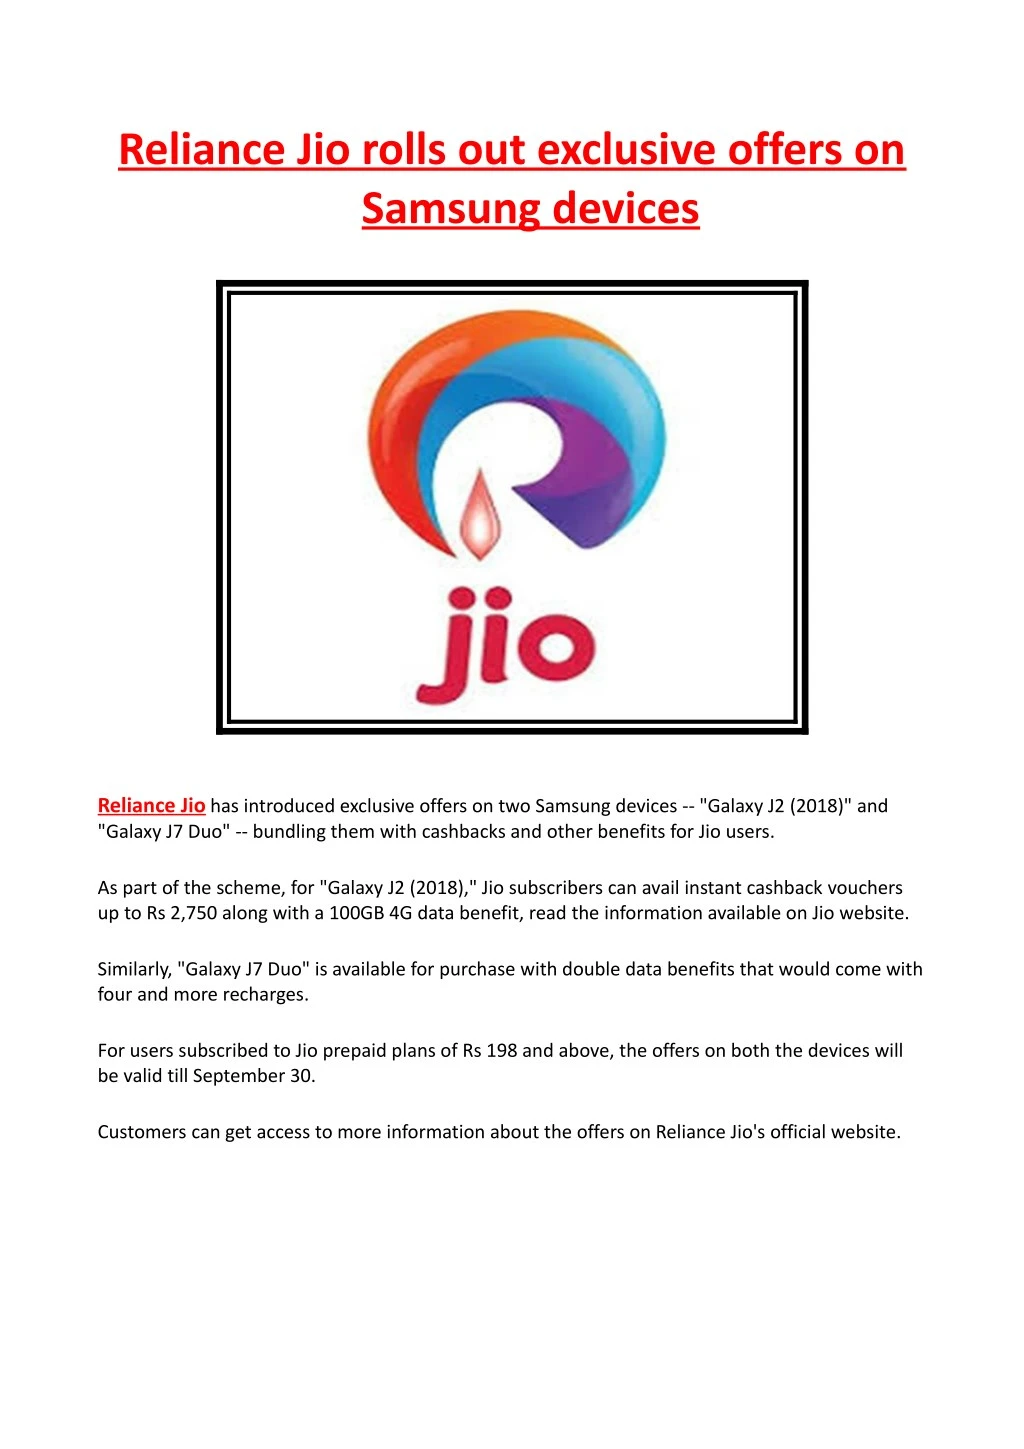 reliance jio rolls out exclusive offers